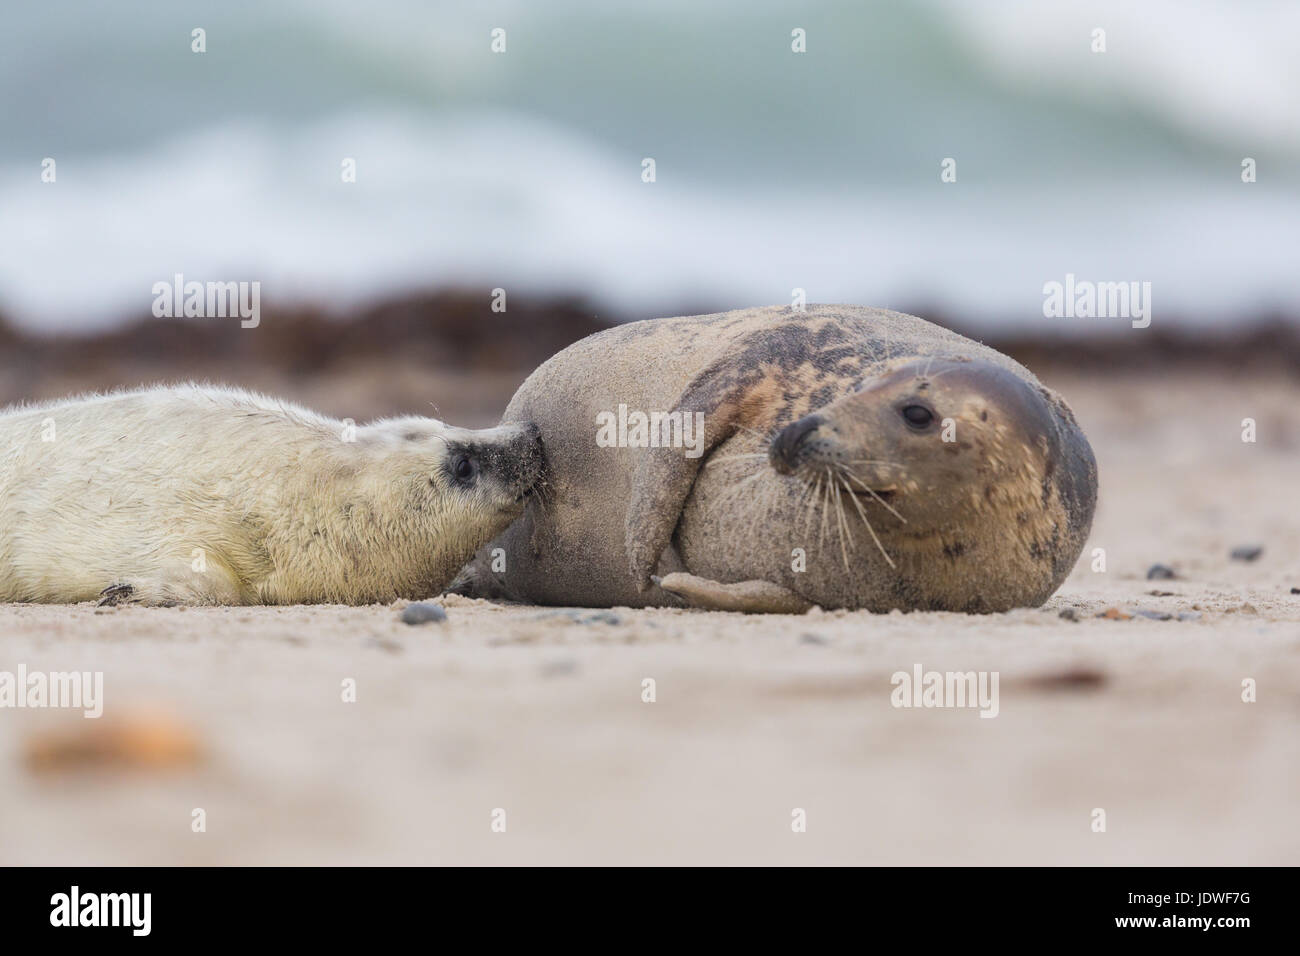 natural portrait of female gray seal (Halichoerus grypus) lactating baby seal on sand beach Stock Photo